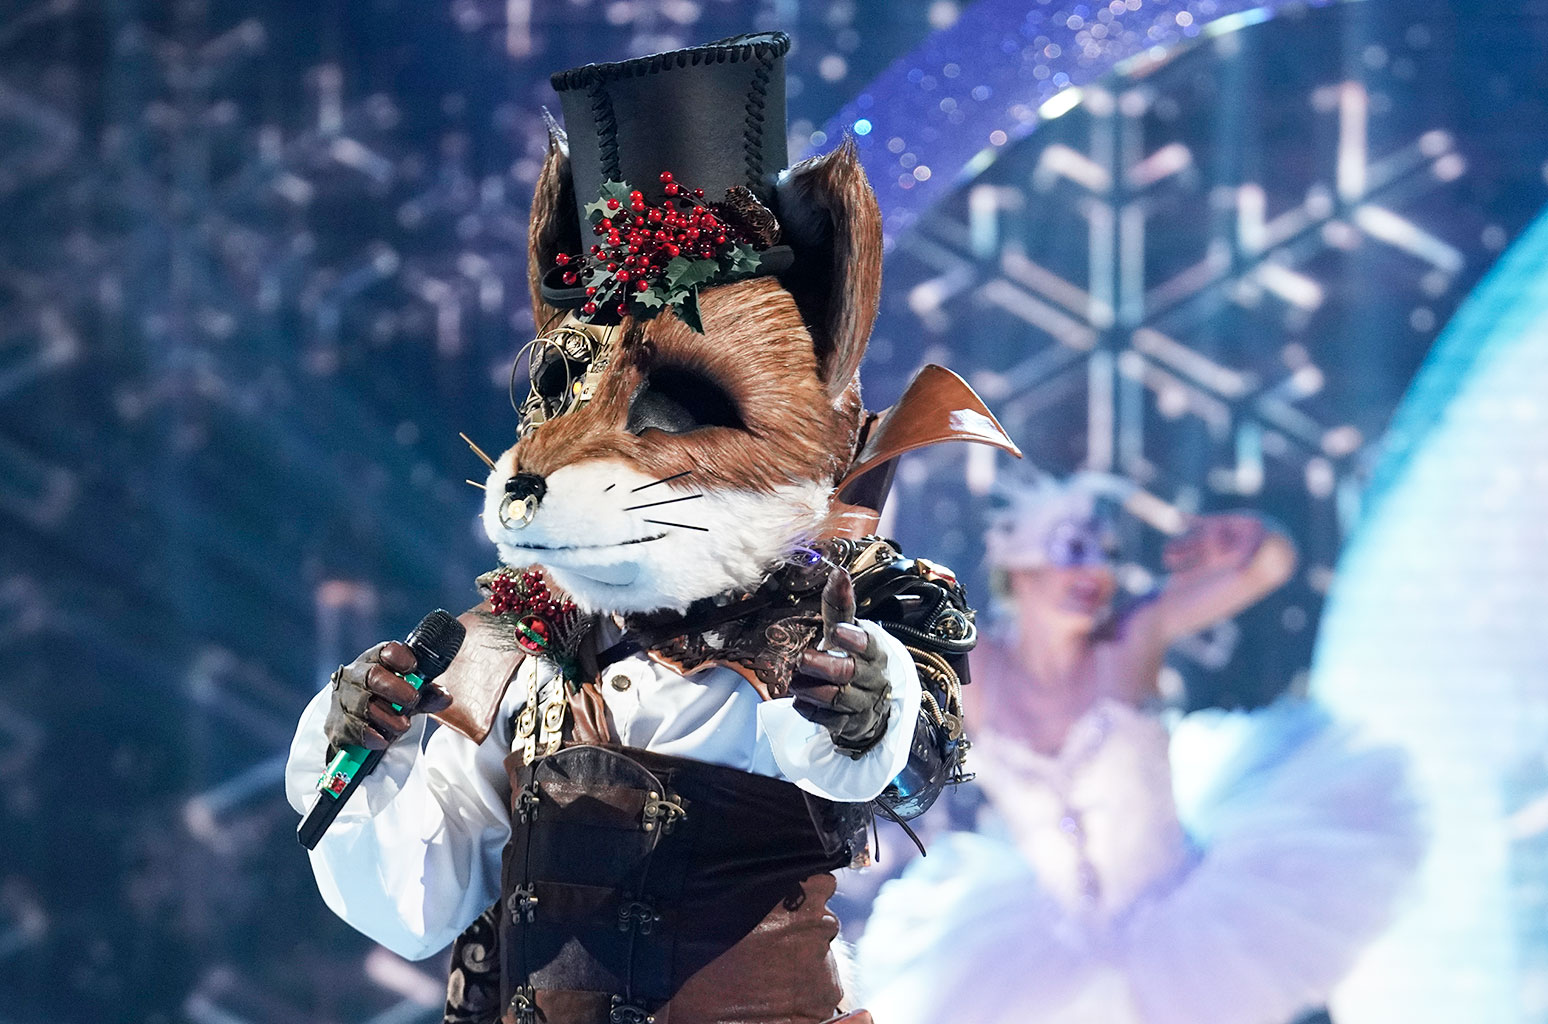 Who Did You Want to Win 'The Masked Singer' Season 2? Vote! - www.billboard.com